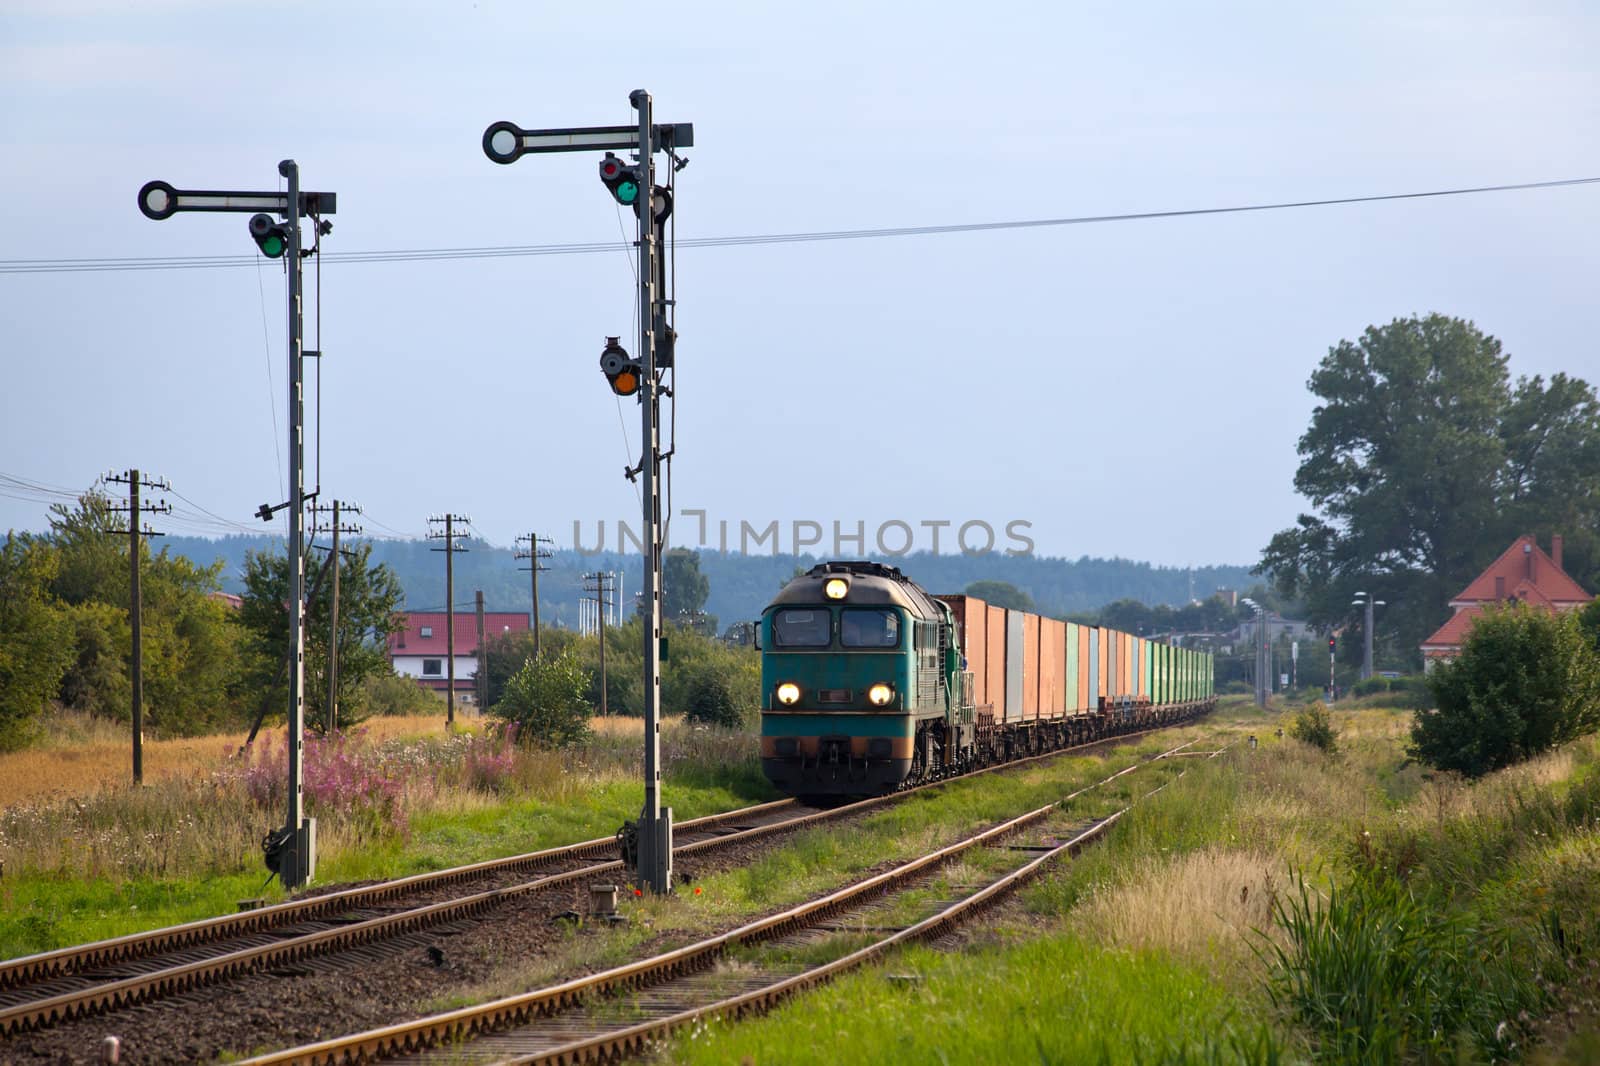 Freight train hauled by the diesel locomotives stopped on the station
